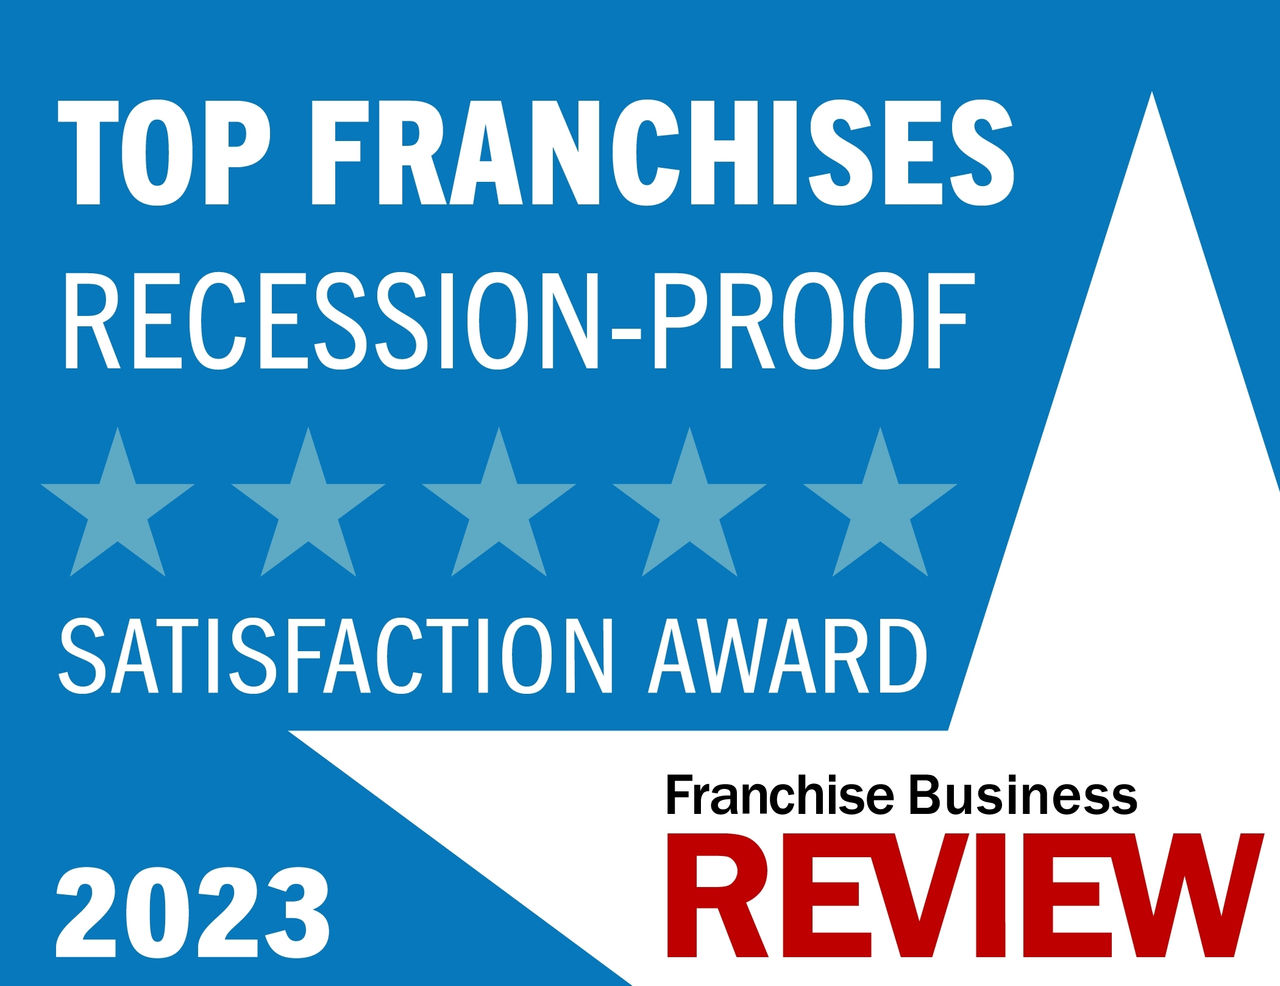 Franchise Business Review Recession Proof Award